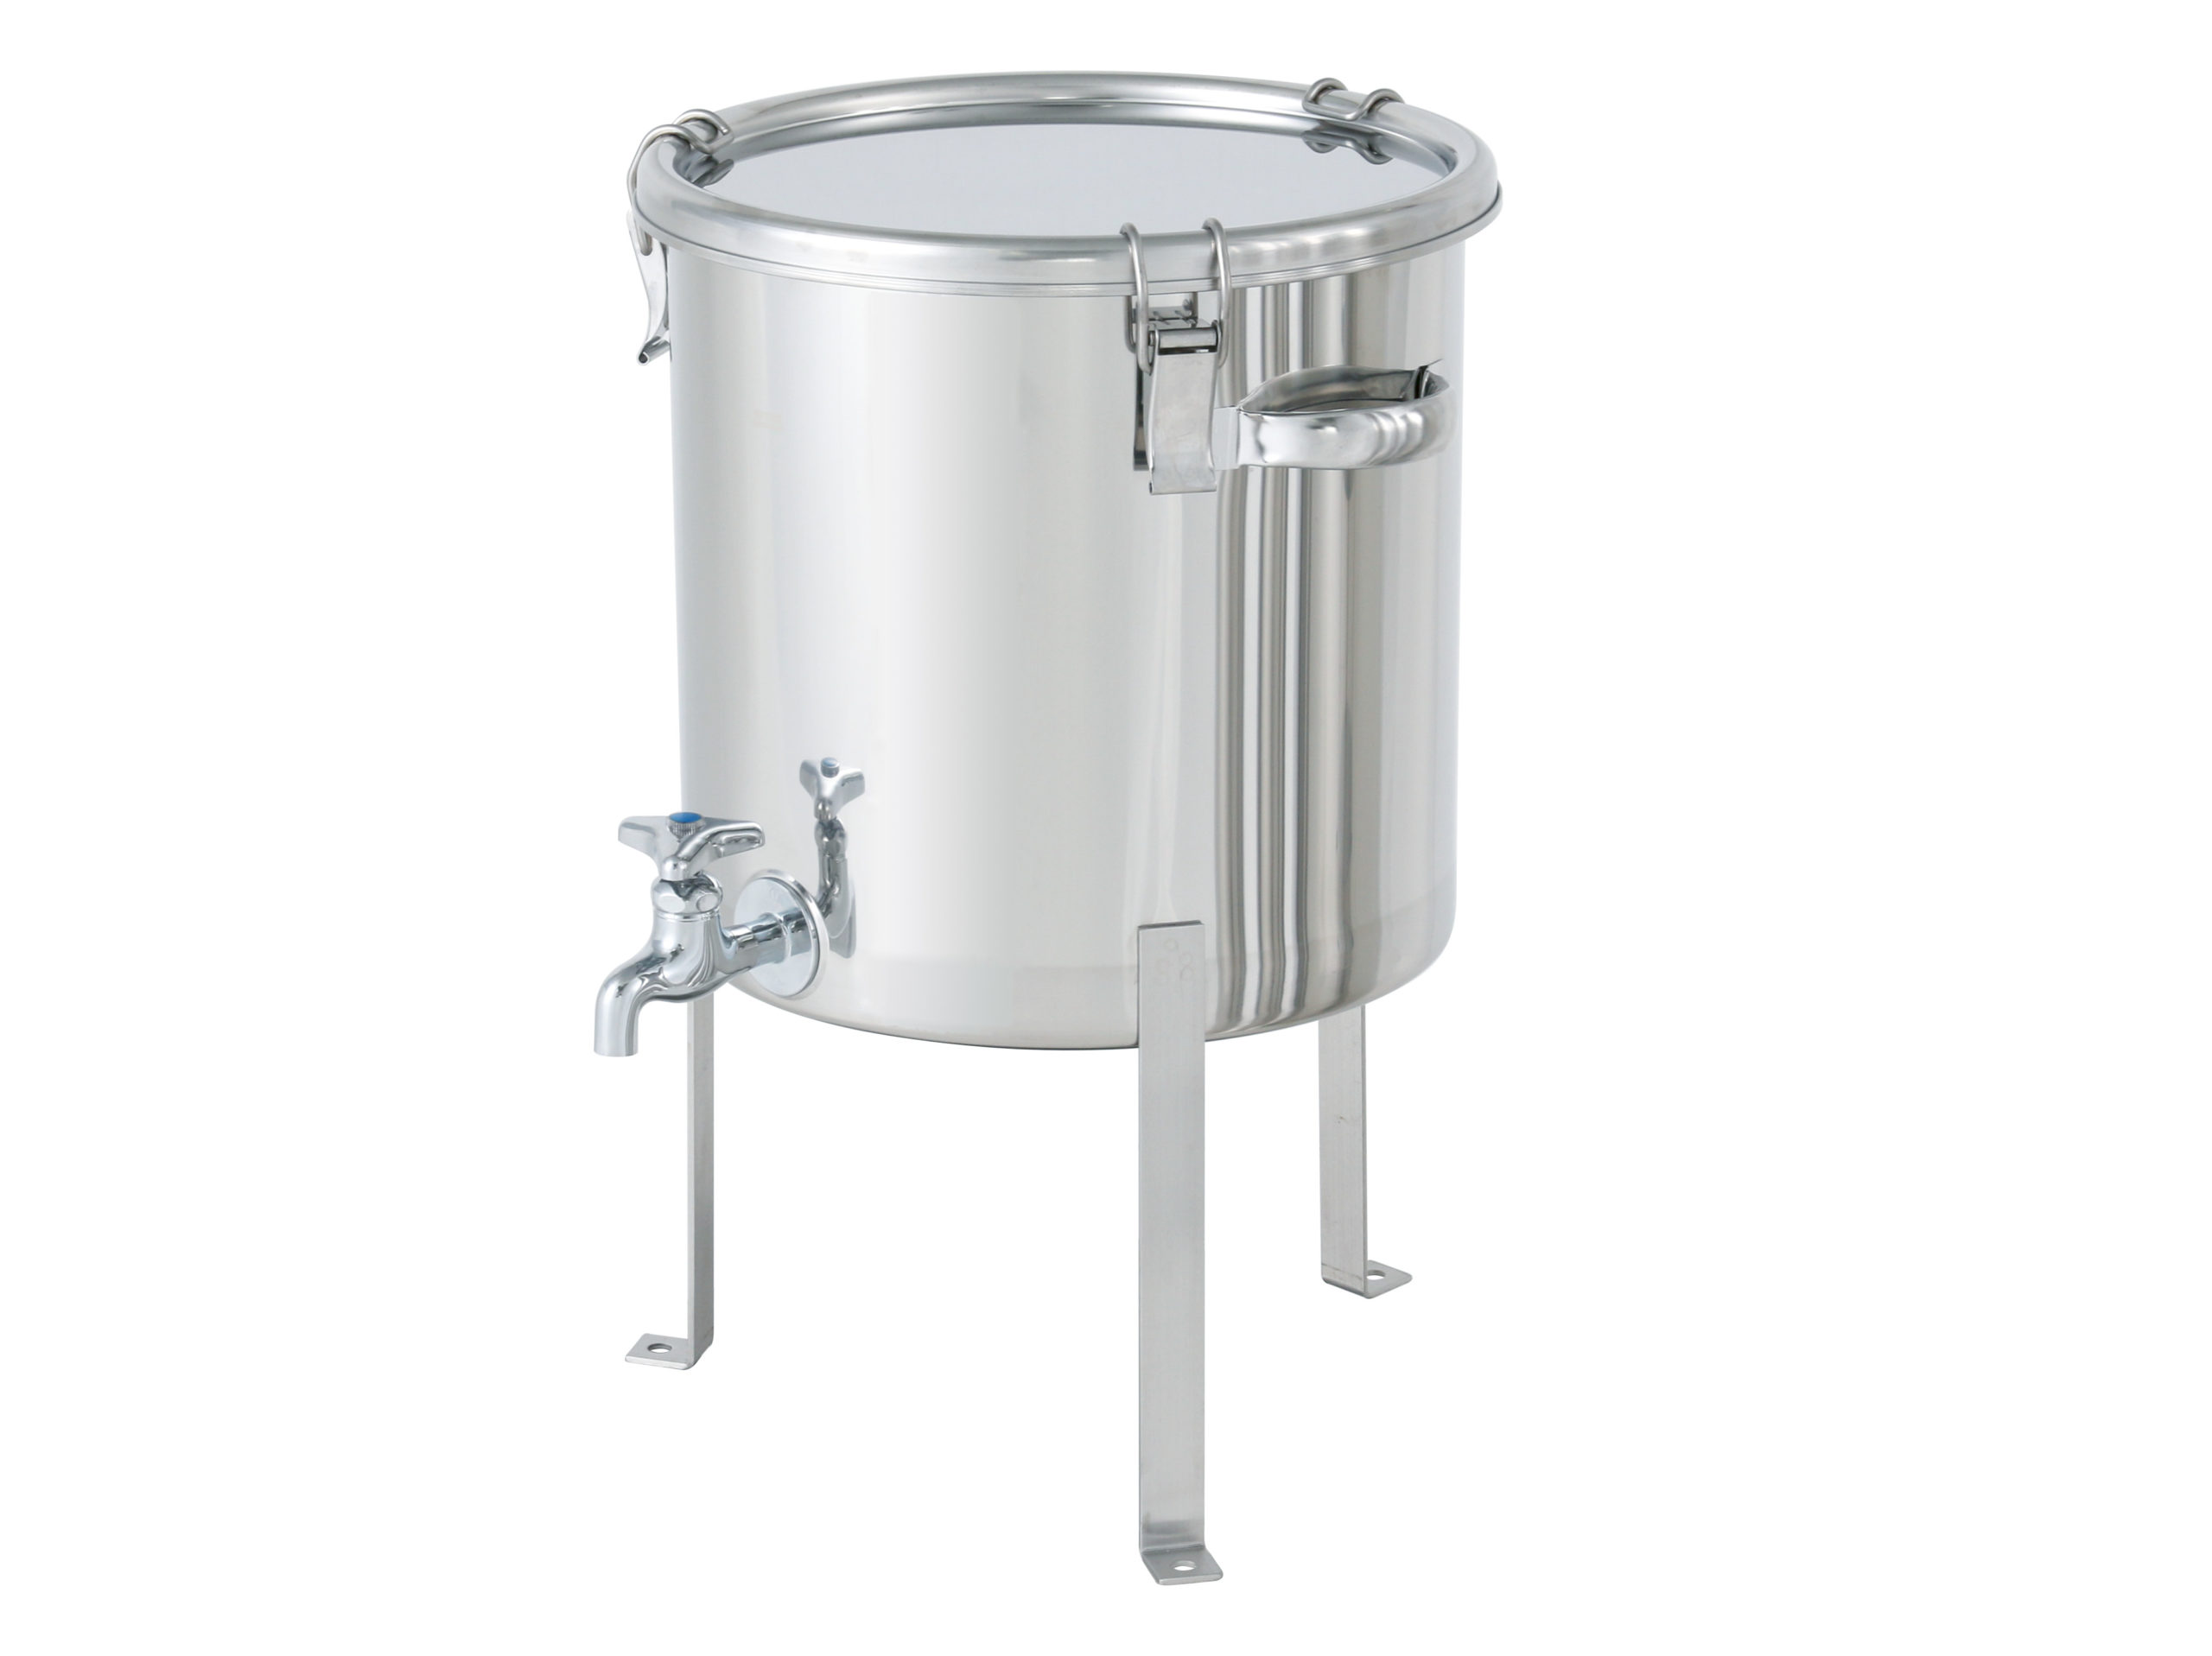 CTH-W-FL : Stainless Steel Sealed Container with Faucet, with Flat Steel Leg